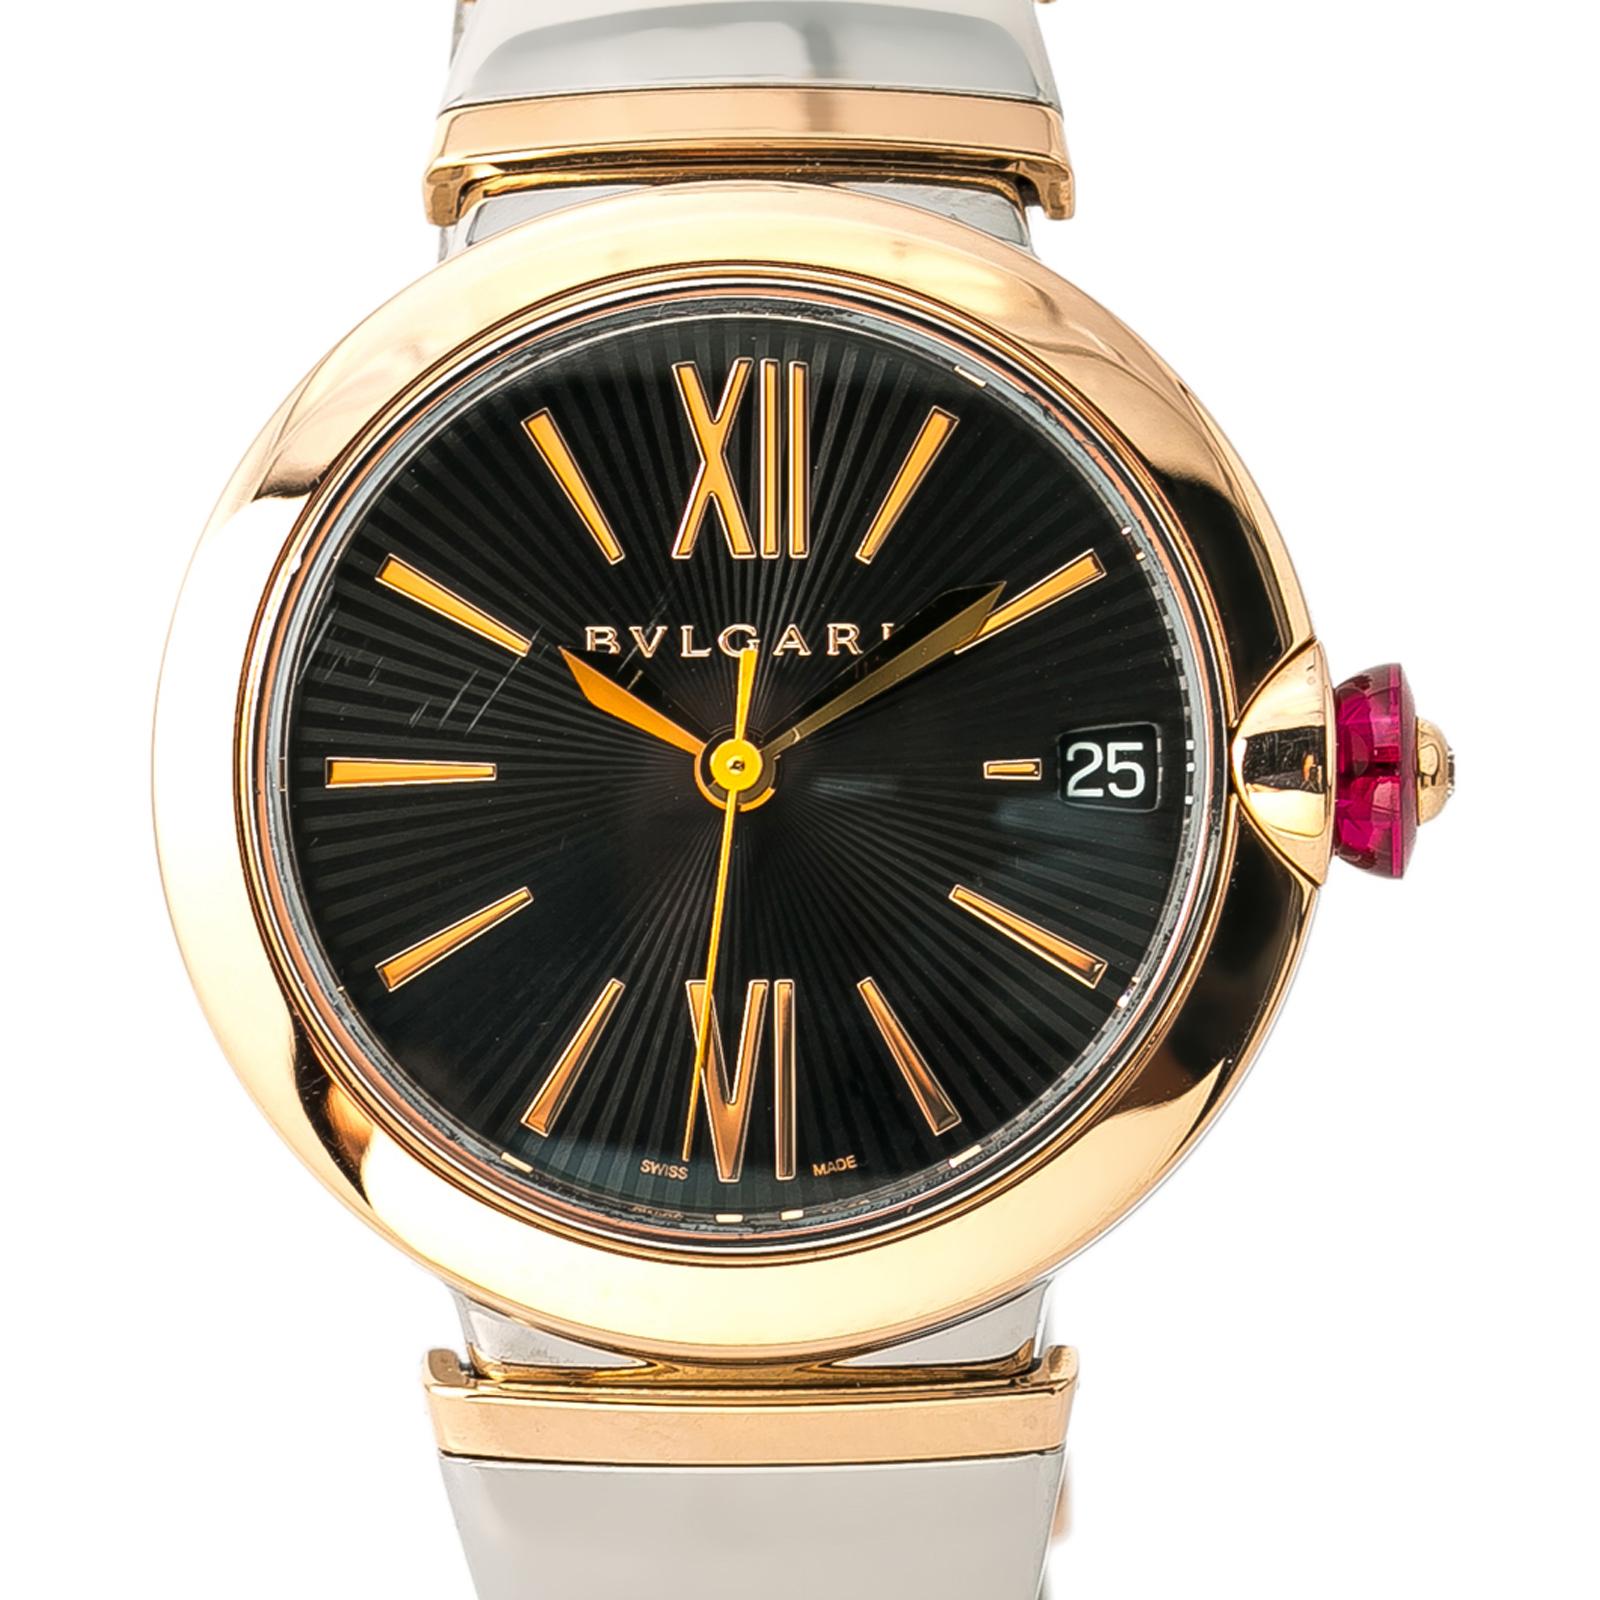 Bvlgari Lvcea LUP 33 SG Ladies Automatic Watch 18k Rose Gold Two Tone 33mm